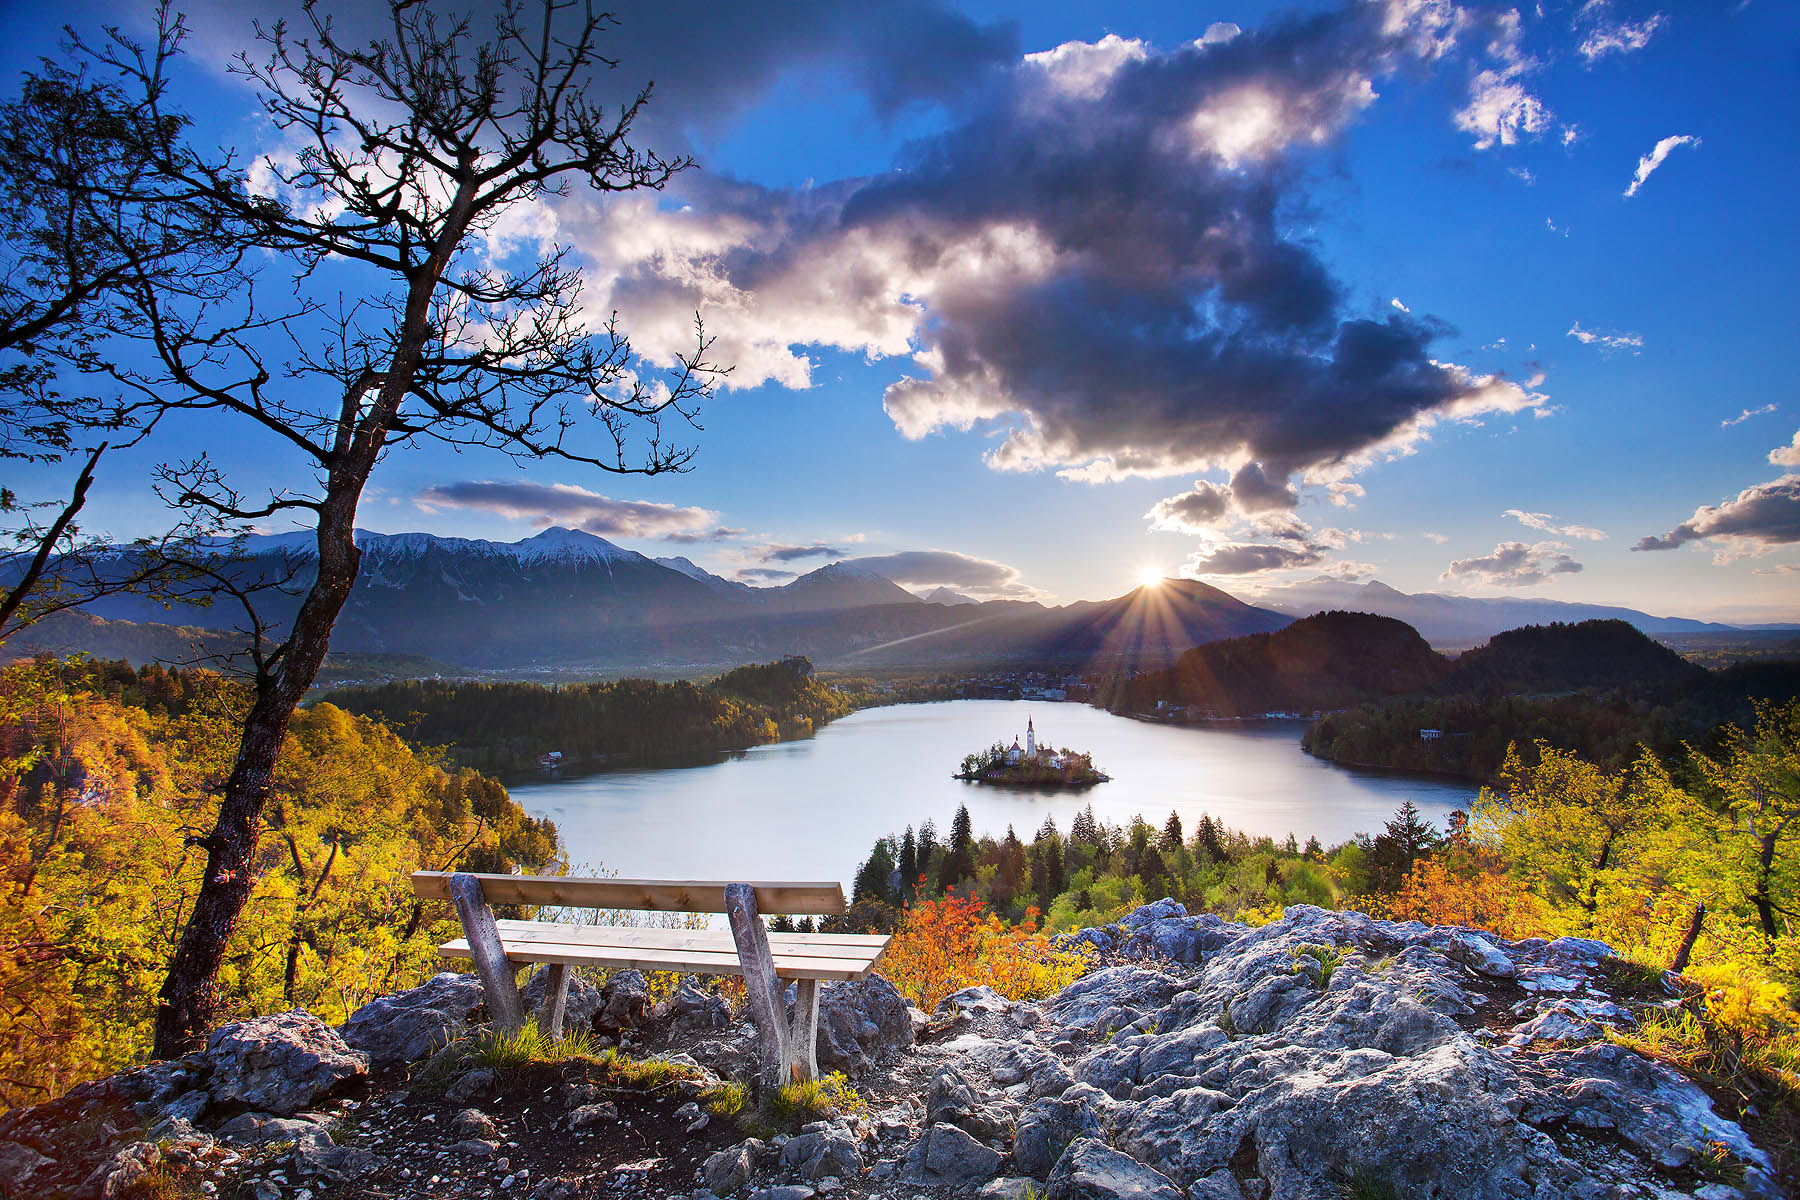 Lake Bled at sunrise from the Ojstrica viewpoint above the Zaka bay with Mt. Stol and Kamnik-Savinja Alps covered with snow in the background